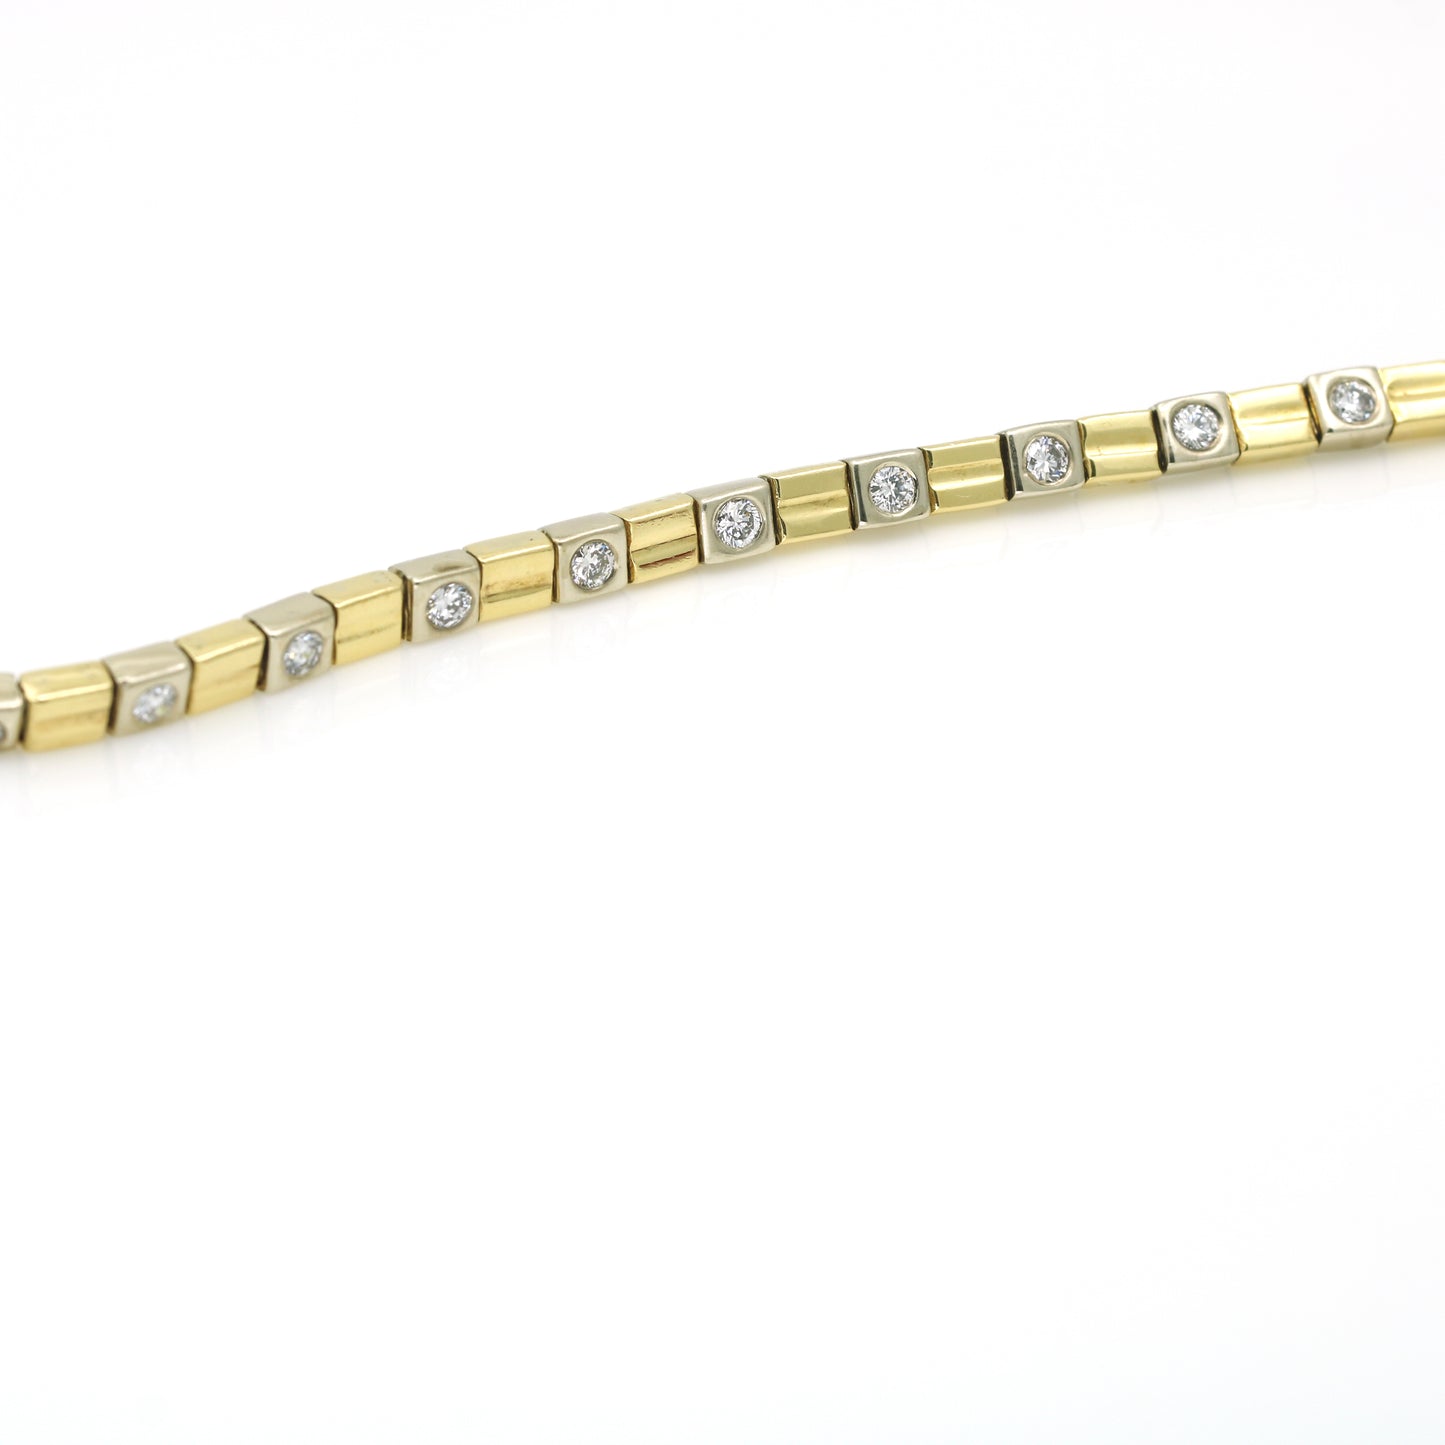 Women's Two-Tone Diamond Link Bracelet in 18k White and Yellow Gold